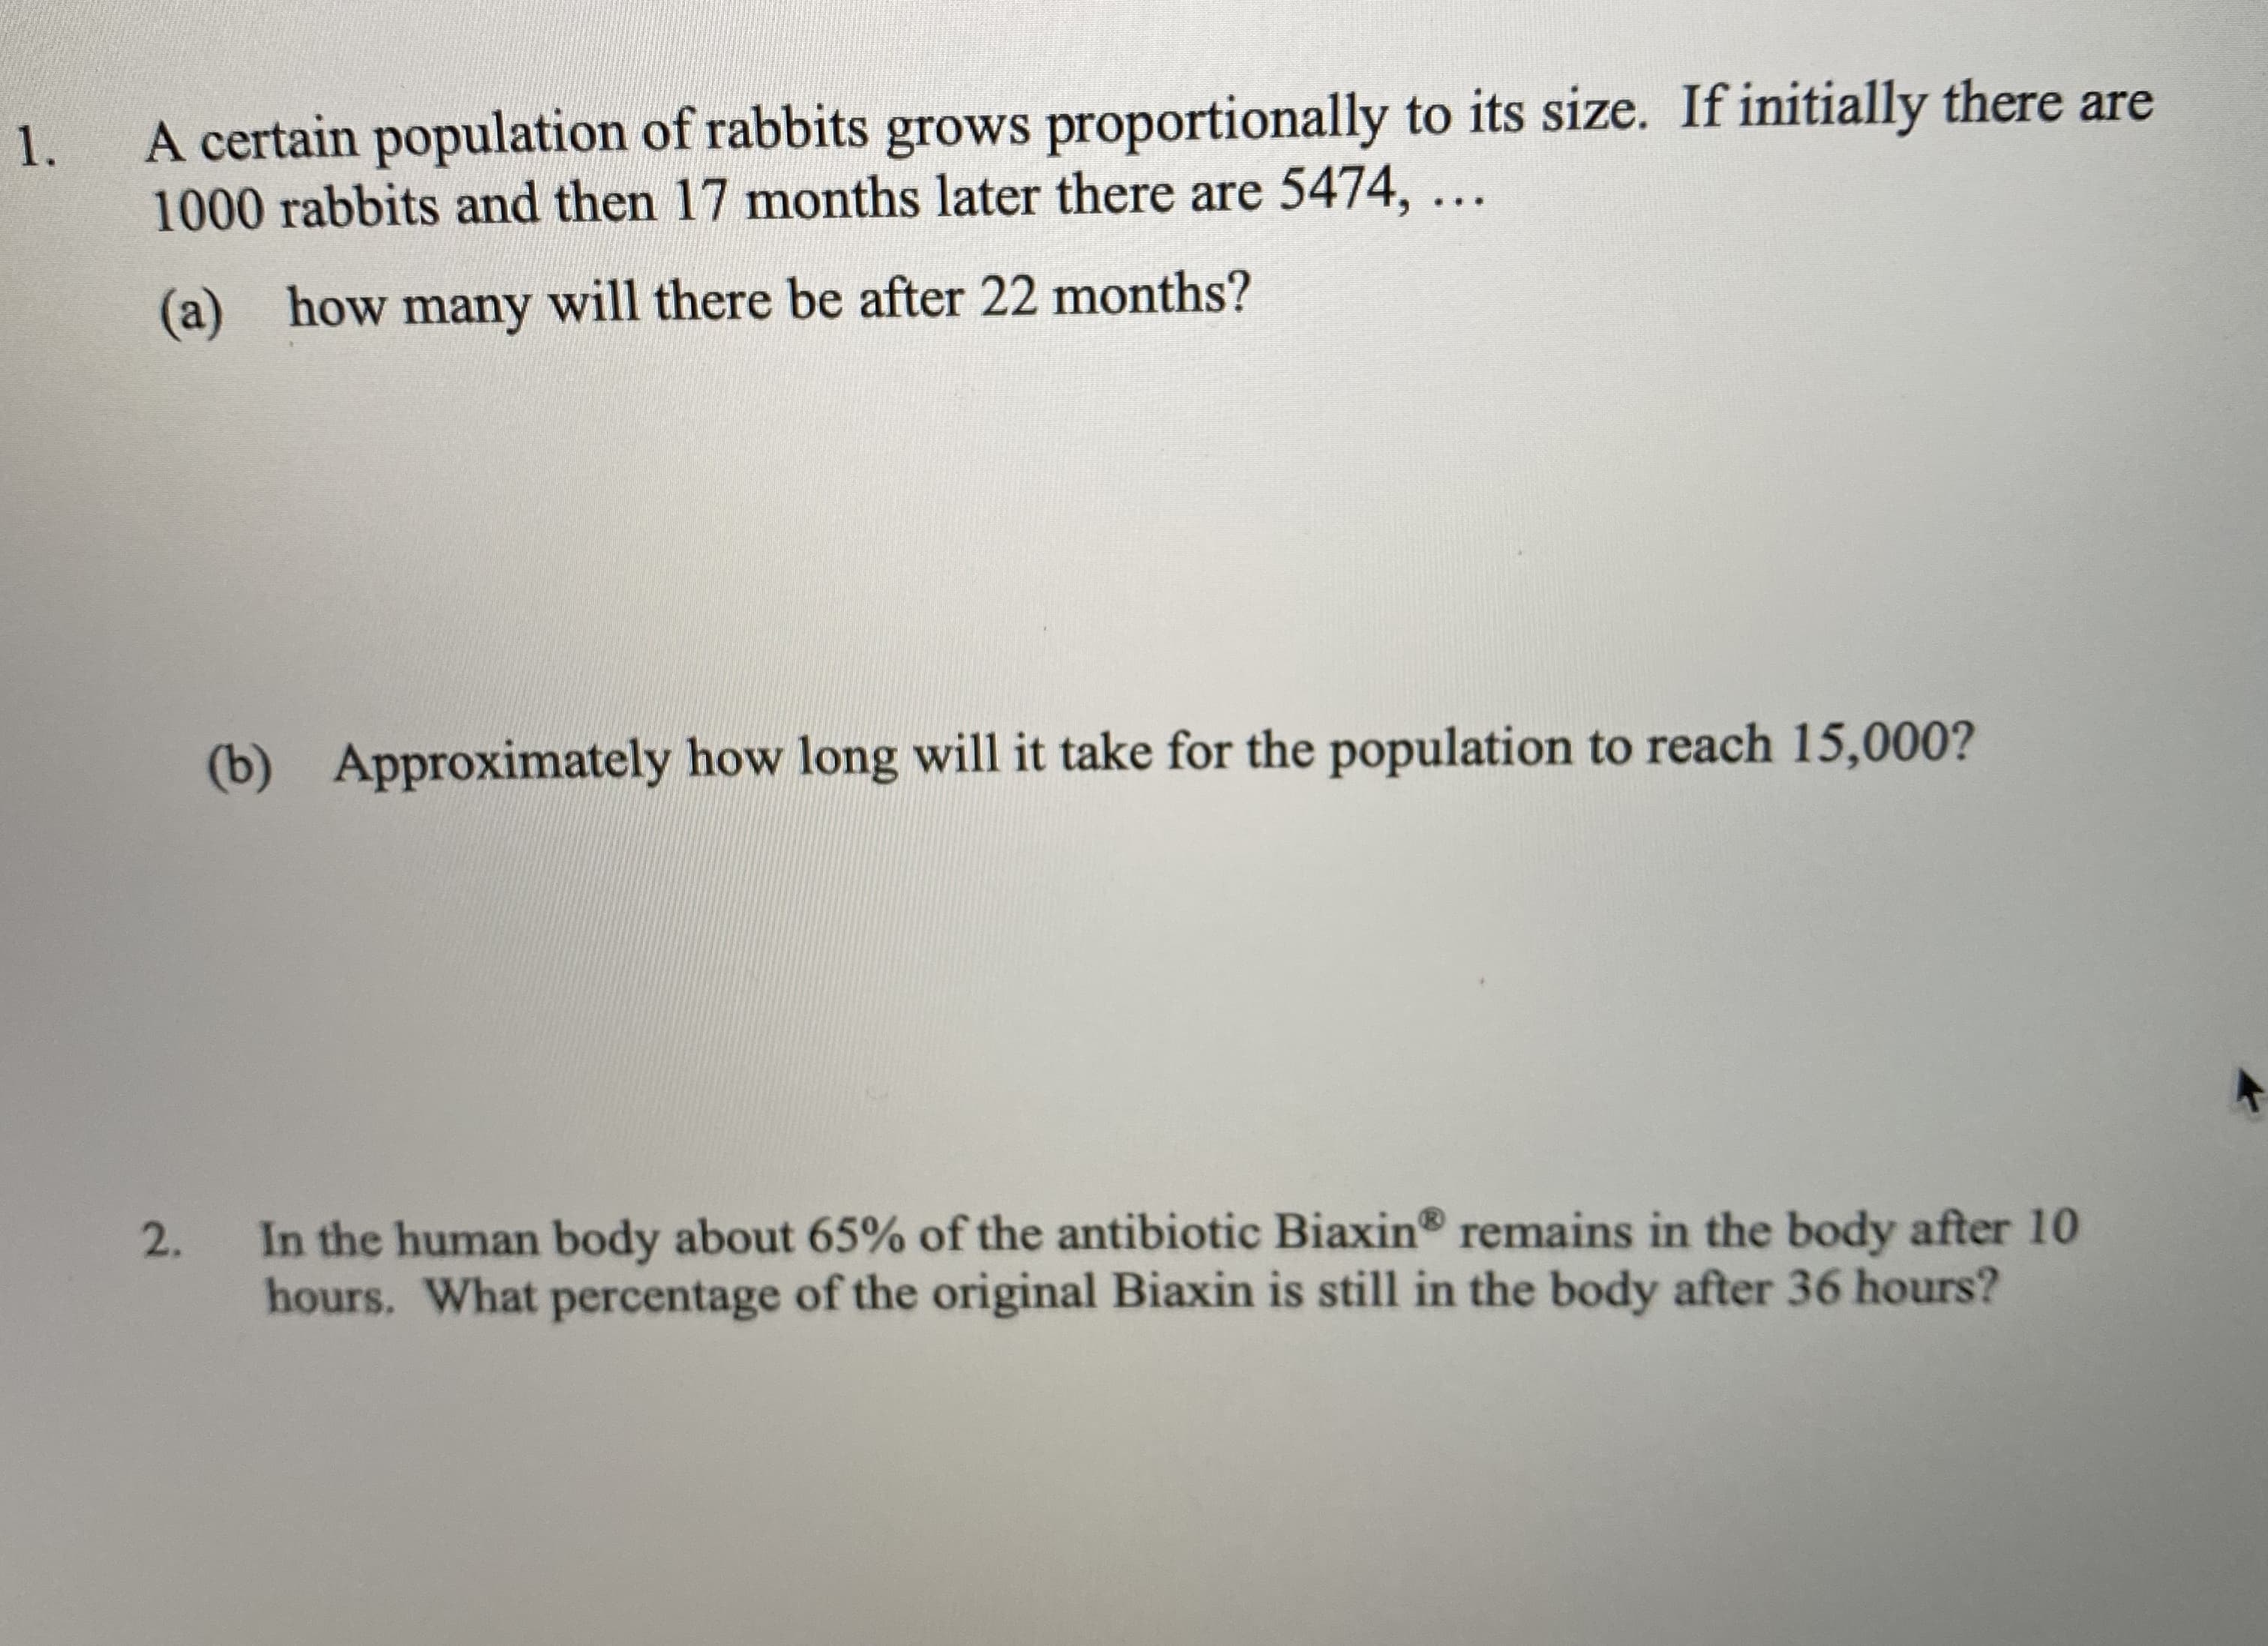 A certain population of rabbits grows proportionally to its size. If initially there are
1000 rabbits and then 17 months later there are 5474, ...
(a) how many will there be after 22 months?
(b) Approximately how long will it take for the population to reach 15,000?
